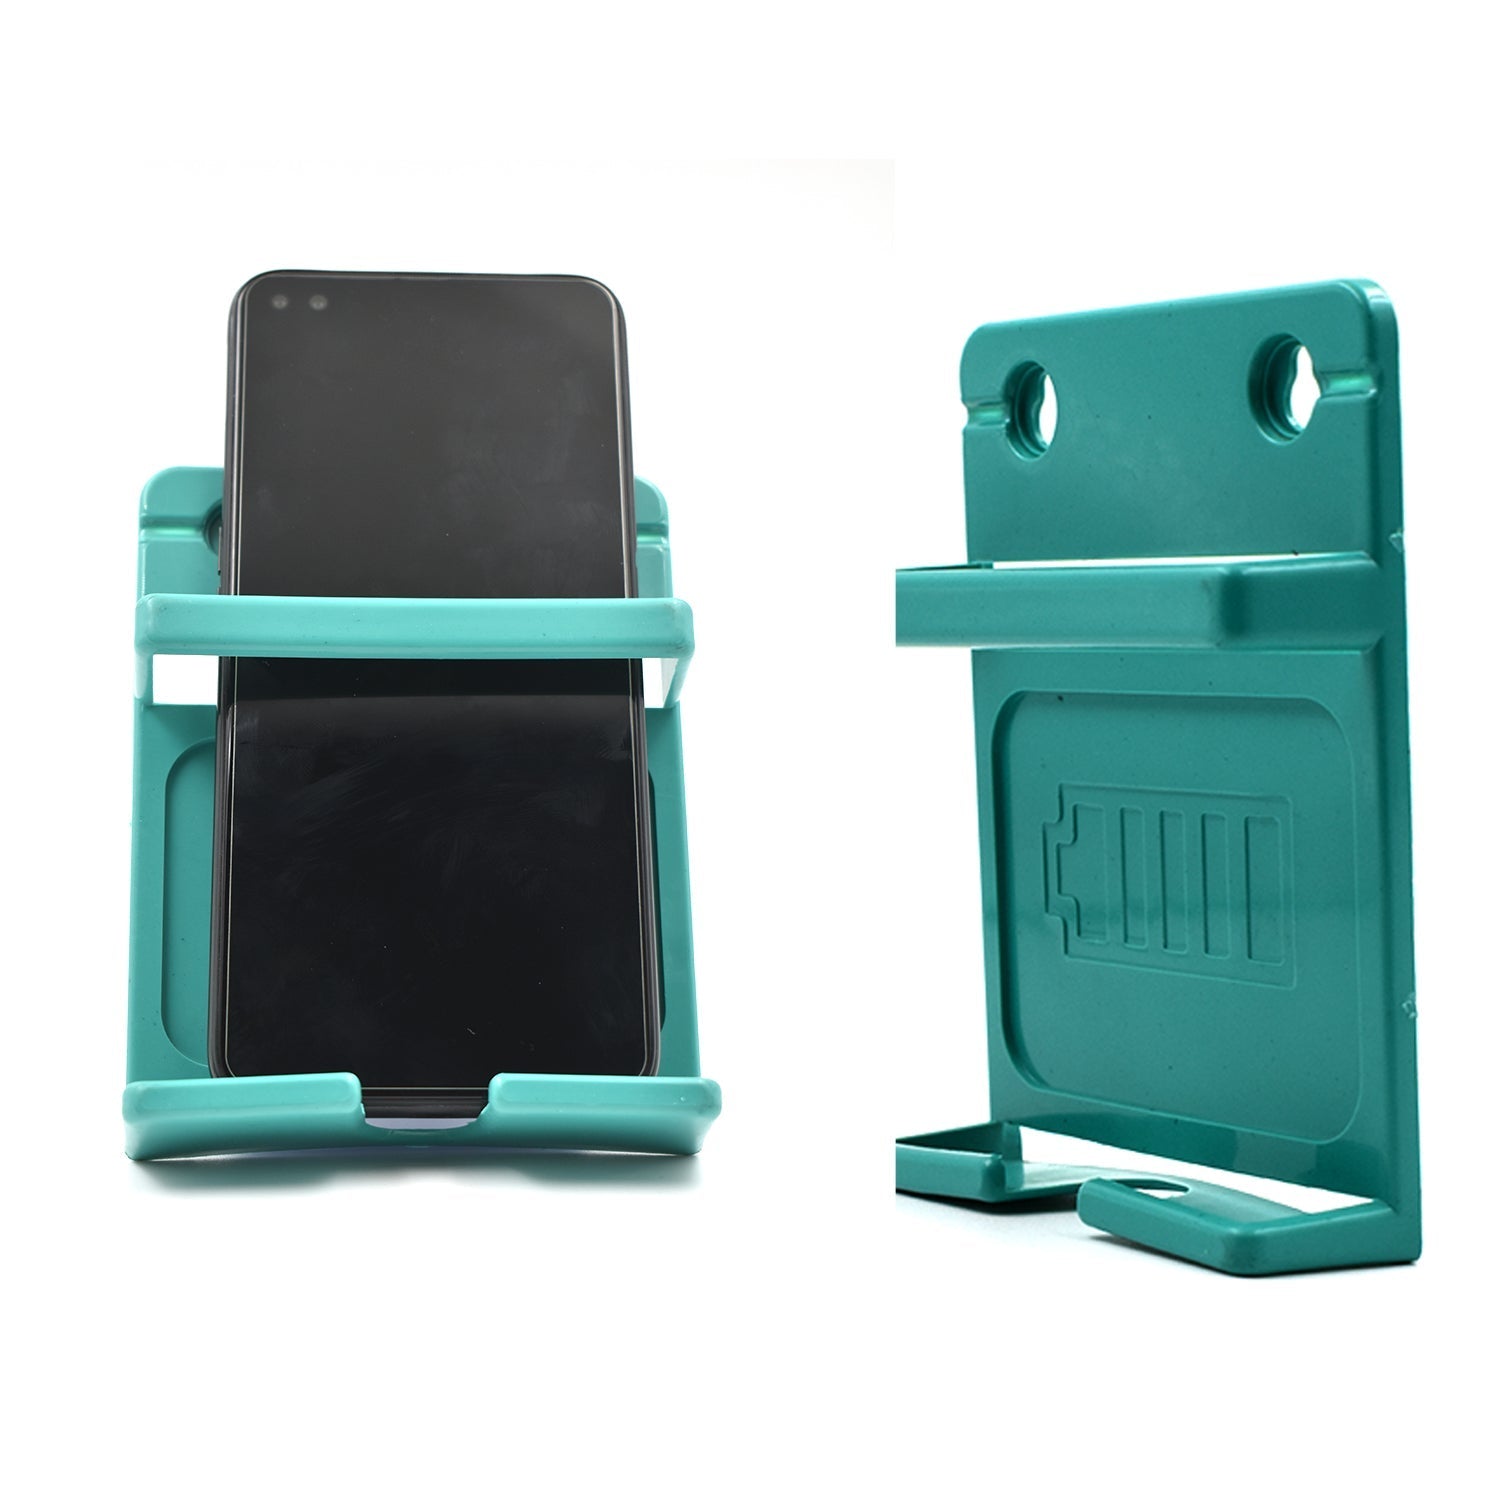 4759 Wall Mounted Storage Mobile Phone Holder (1Pc Only)